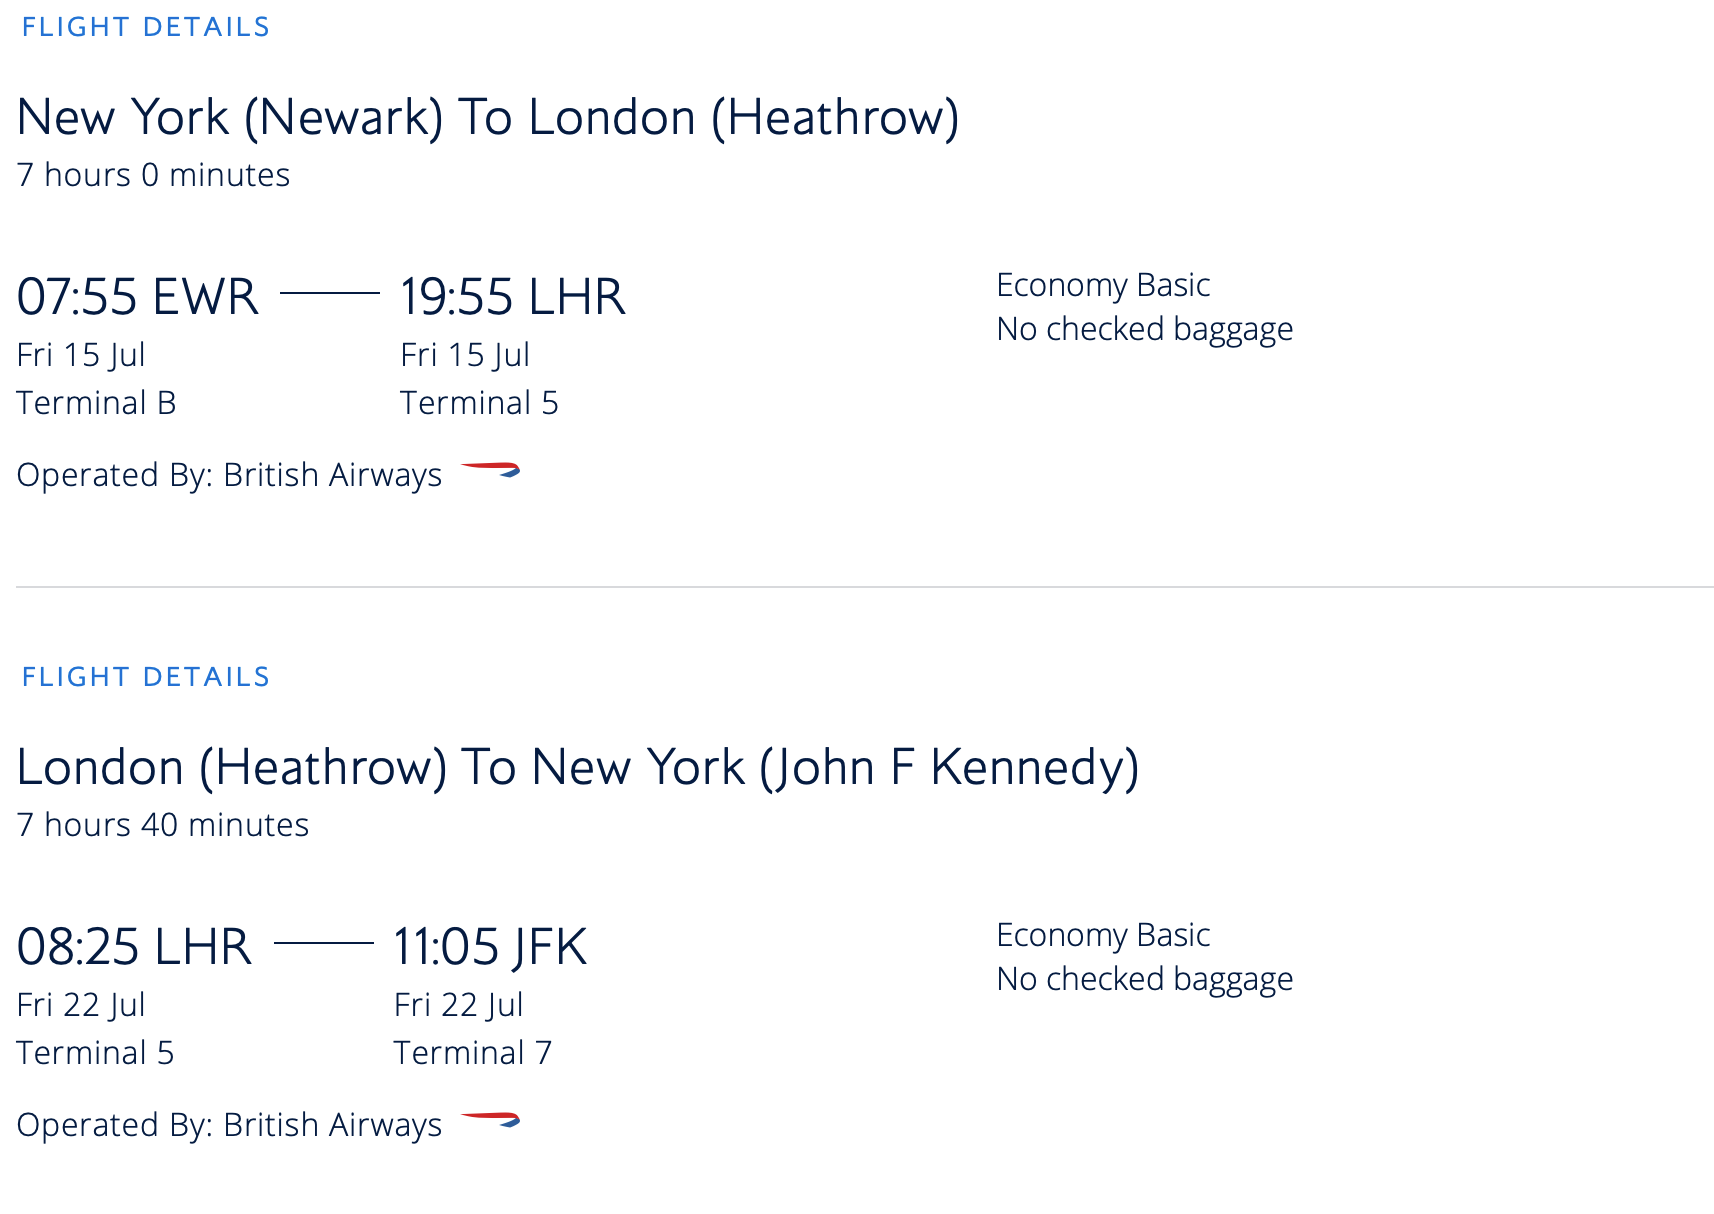 booking class travel meaning